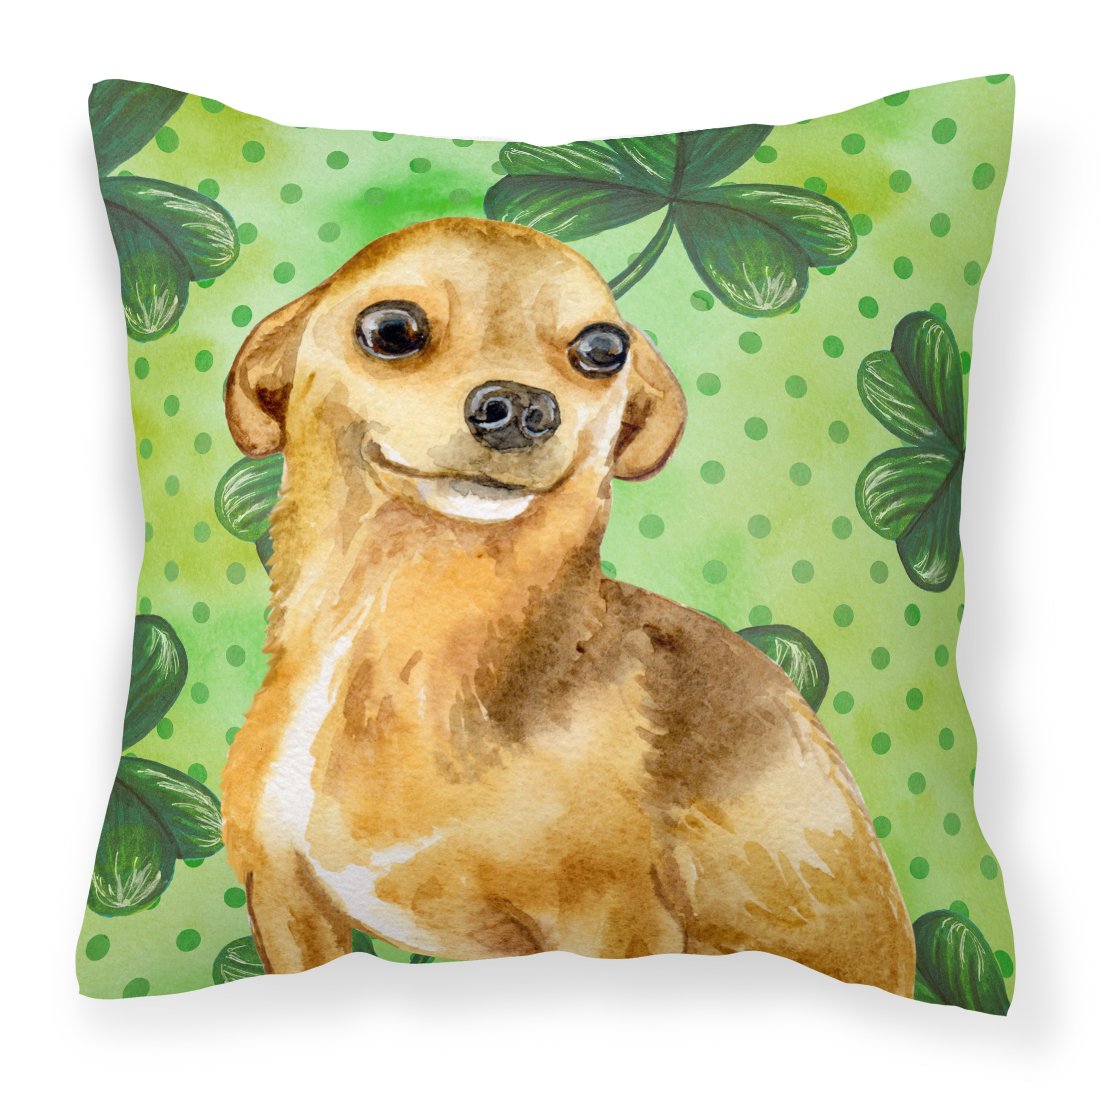 Chihuahua St Patrick's Fabric Decorative Pillow BB9832PW1818 by Caroline's Treasures